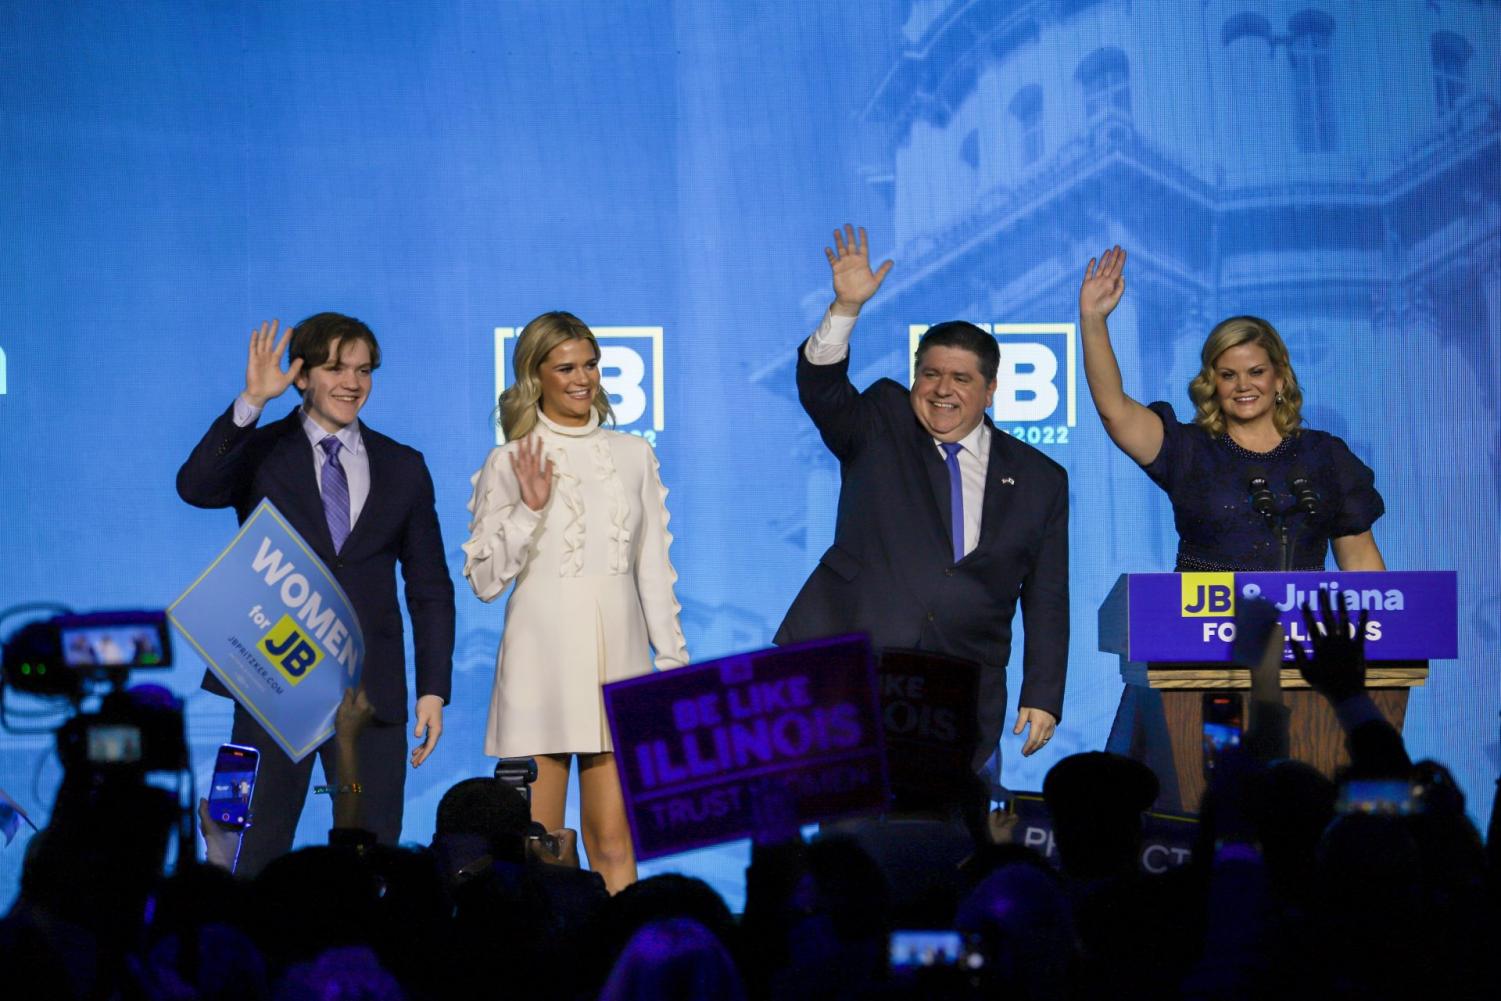 Gov.+JB+Pritzker+wins+decisively+in+Illinois+governors+race+over+Republican+Darren+Bailey